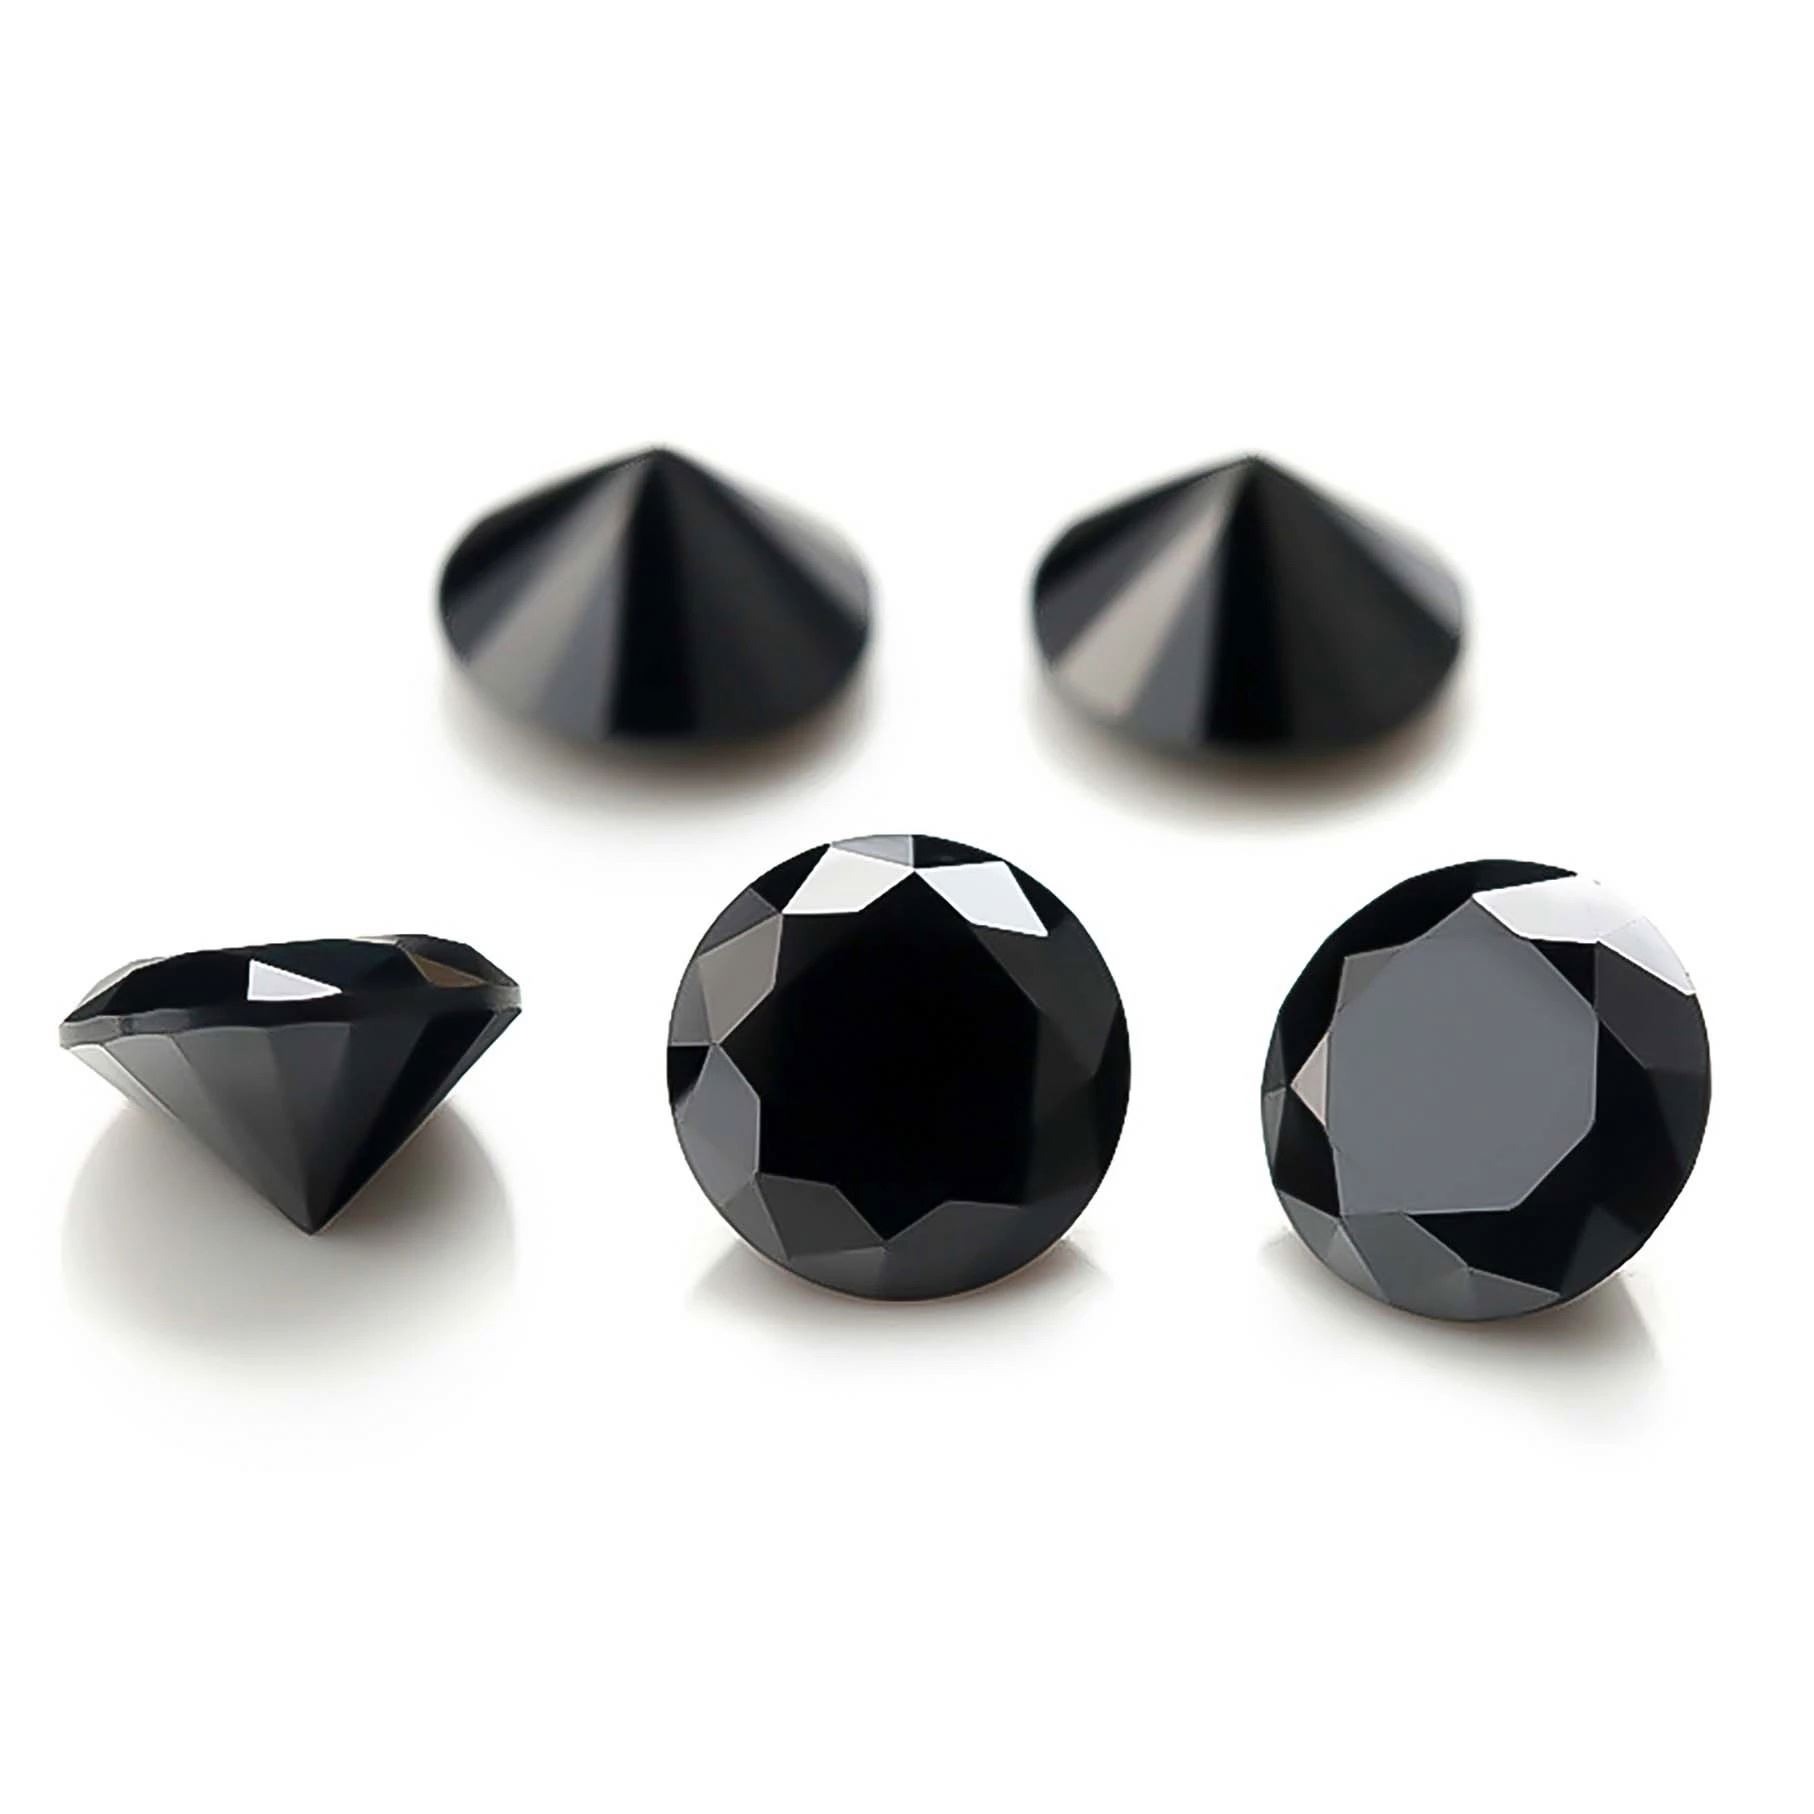 Black Spinel Gemstones Wholesale at factory price from China Supplier and manufacturer